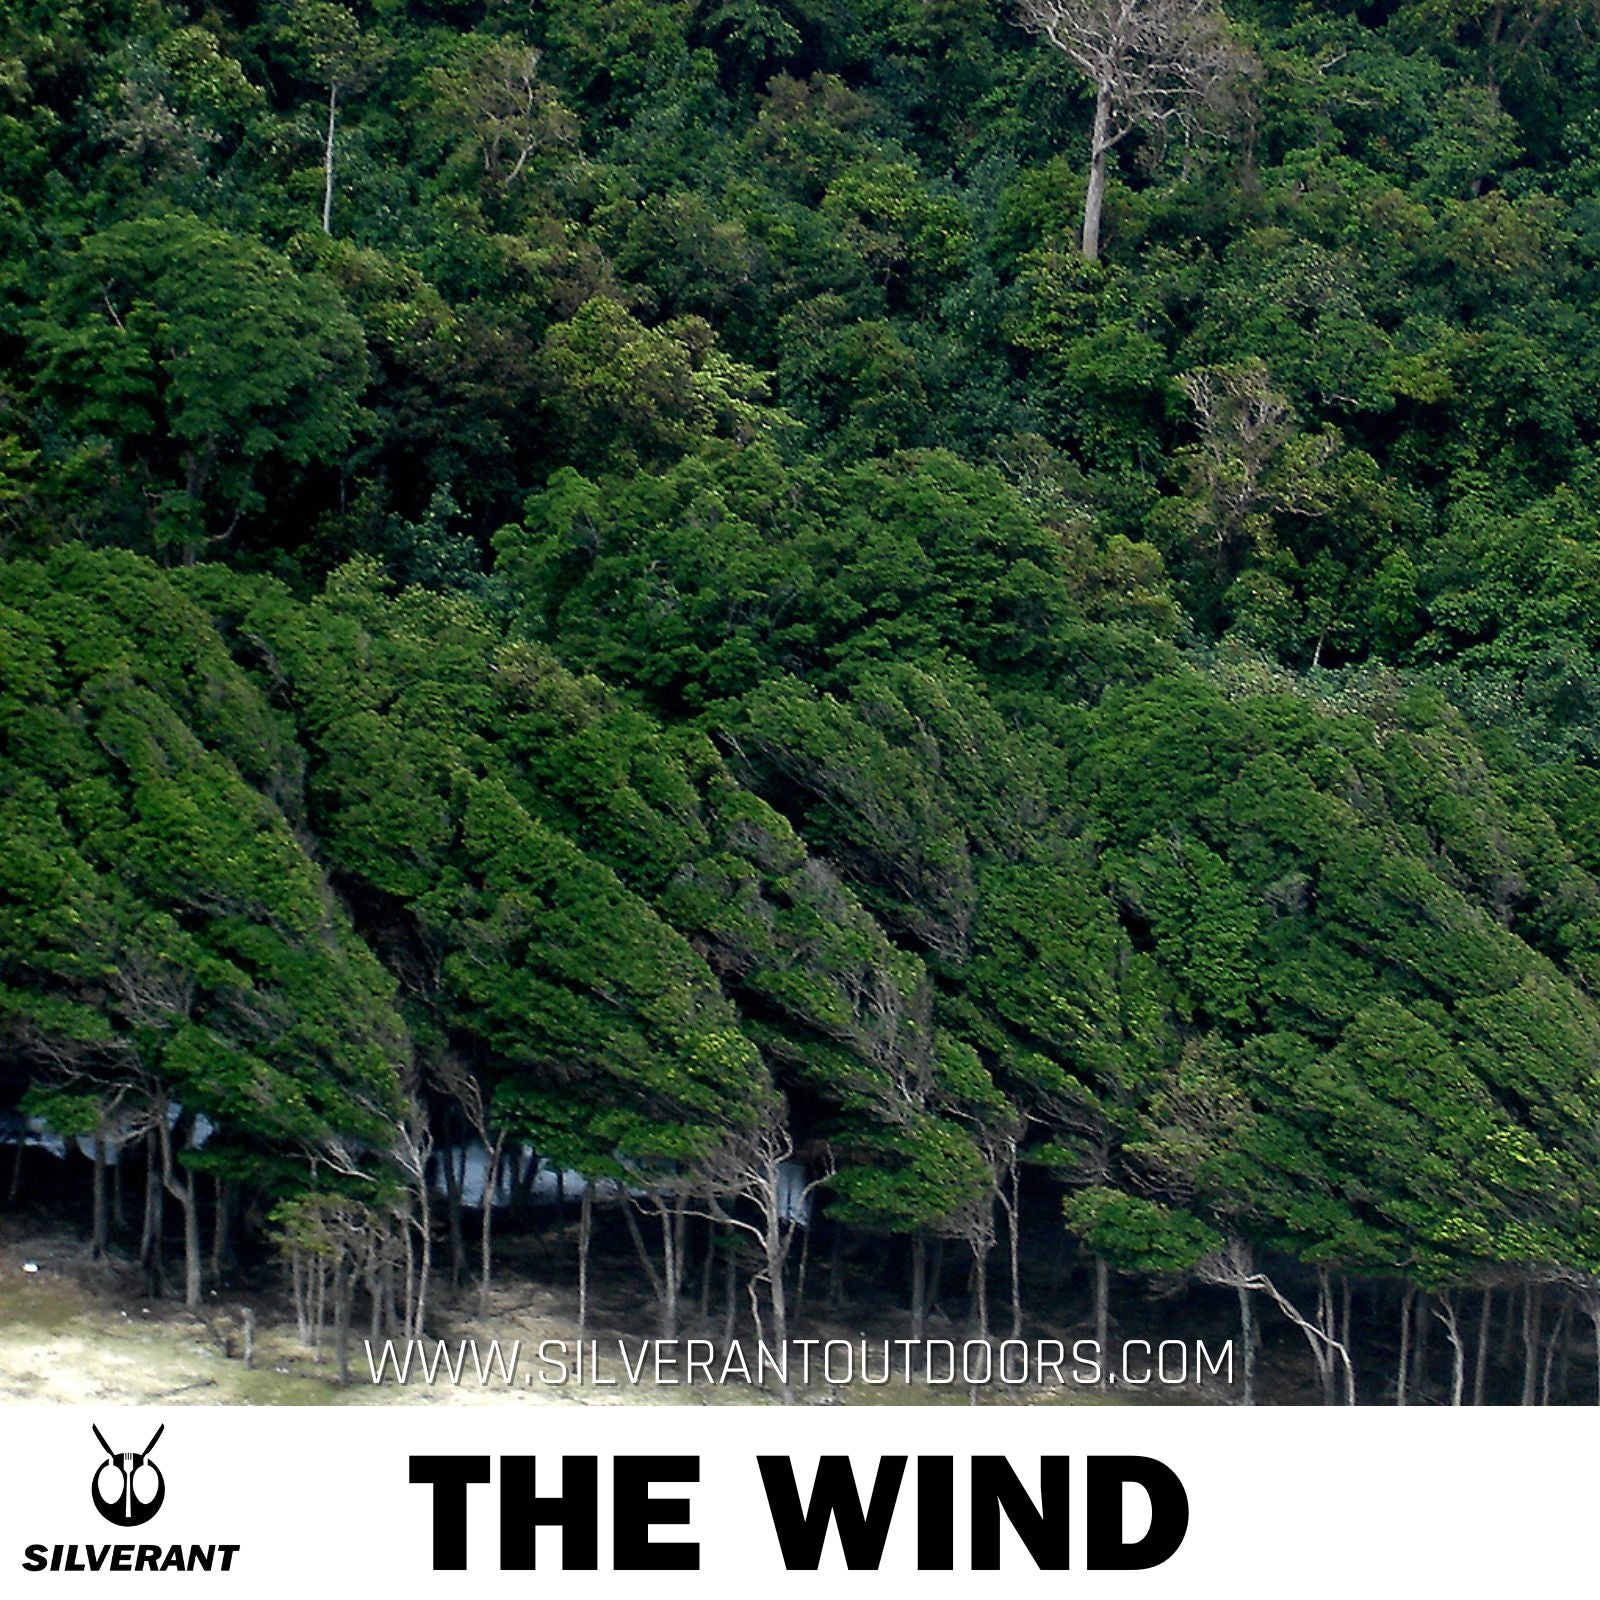 The Wind - SilverAnt Outdoors